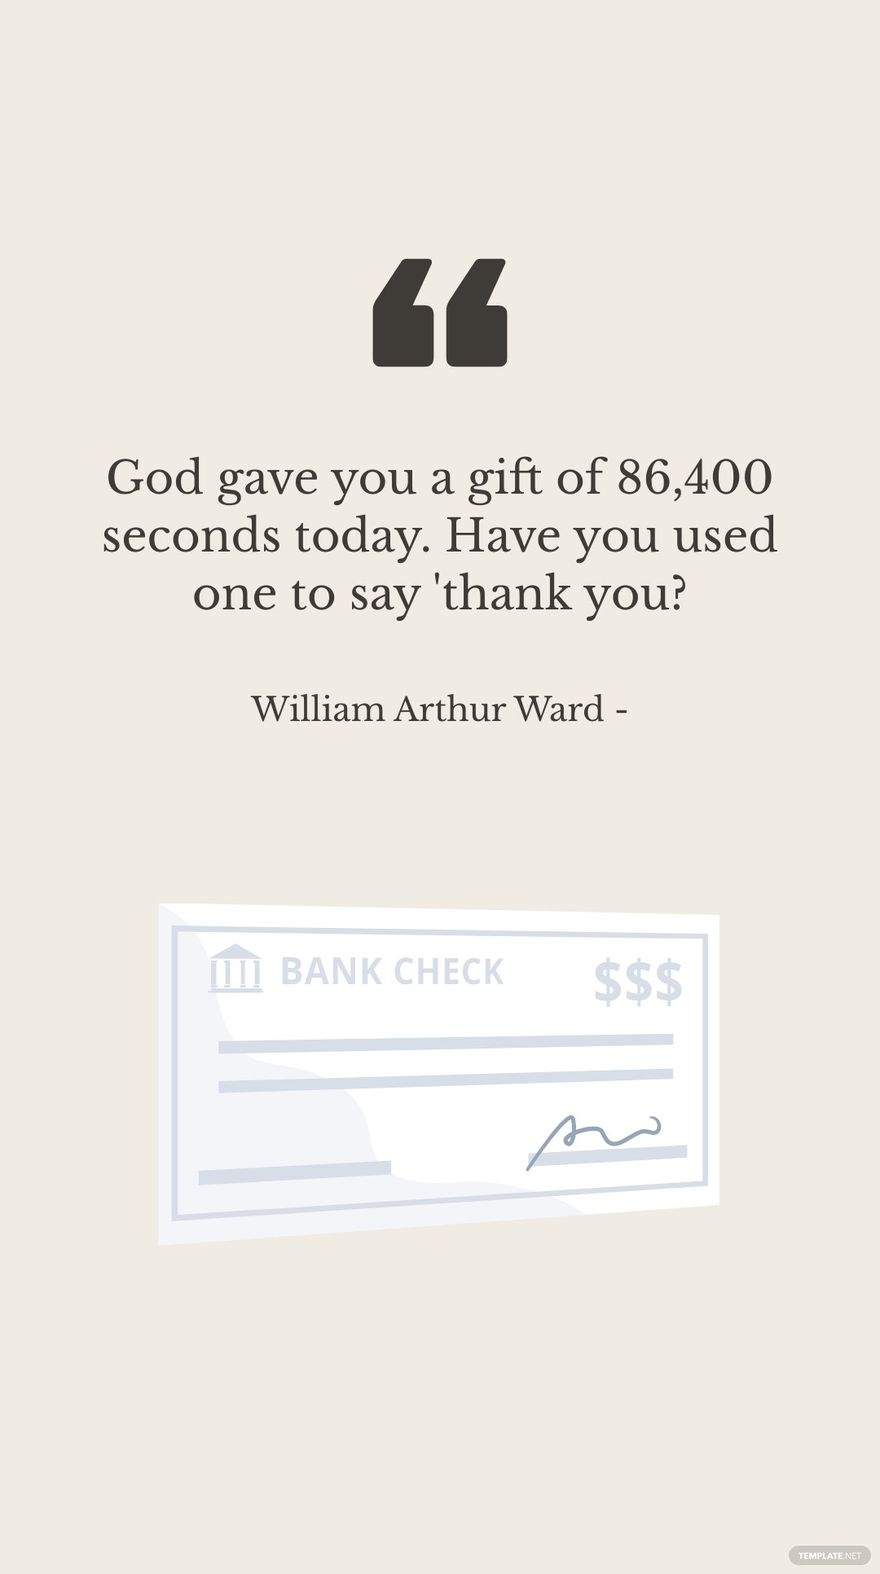 William Arthur Ward - God gave you a gift of 86,400 seconds today. Have you used one to say 'thank you?